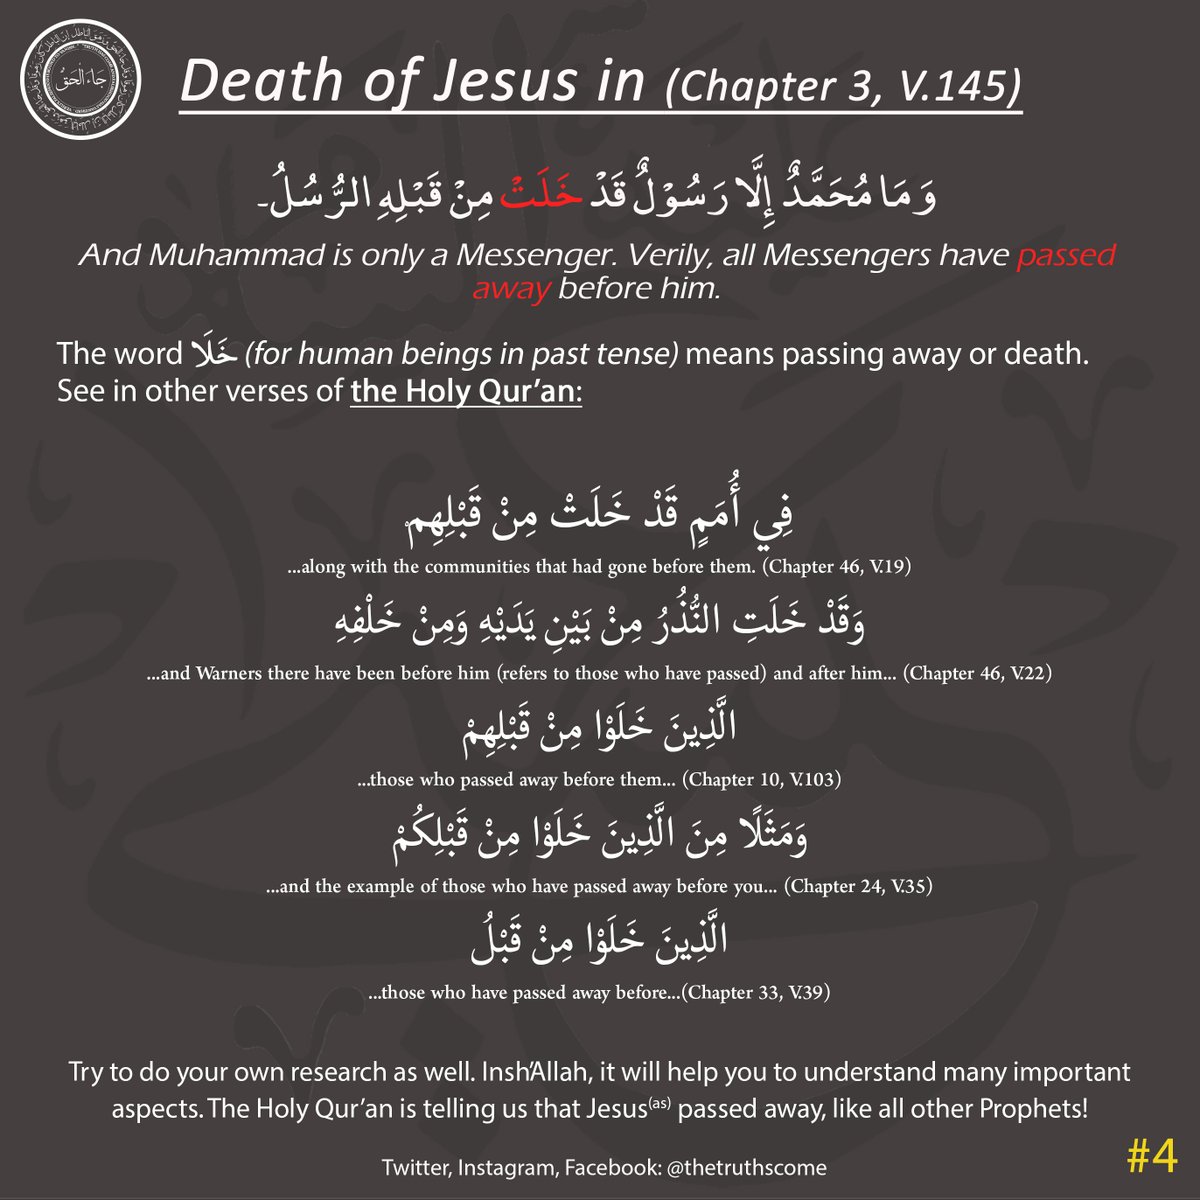 Whenever "Khala" is used in the Holy Qur'an, in the past tense for human beings, it means death or passing away.